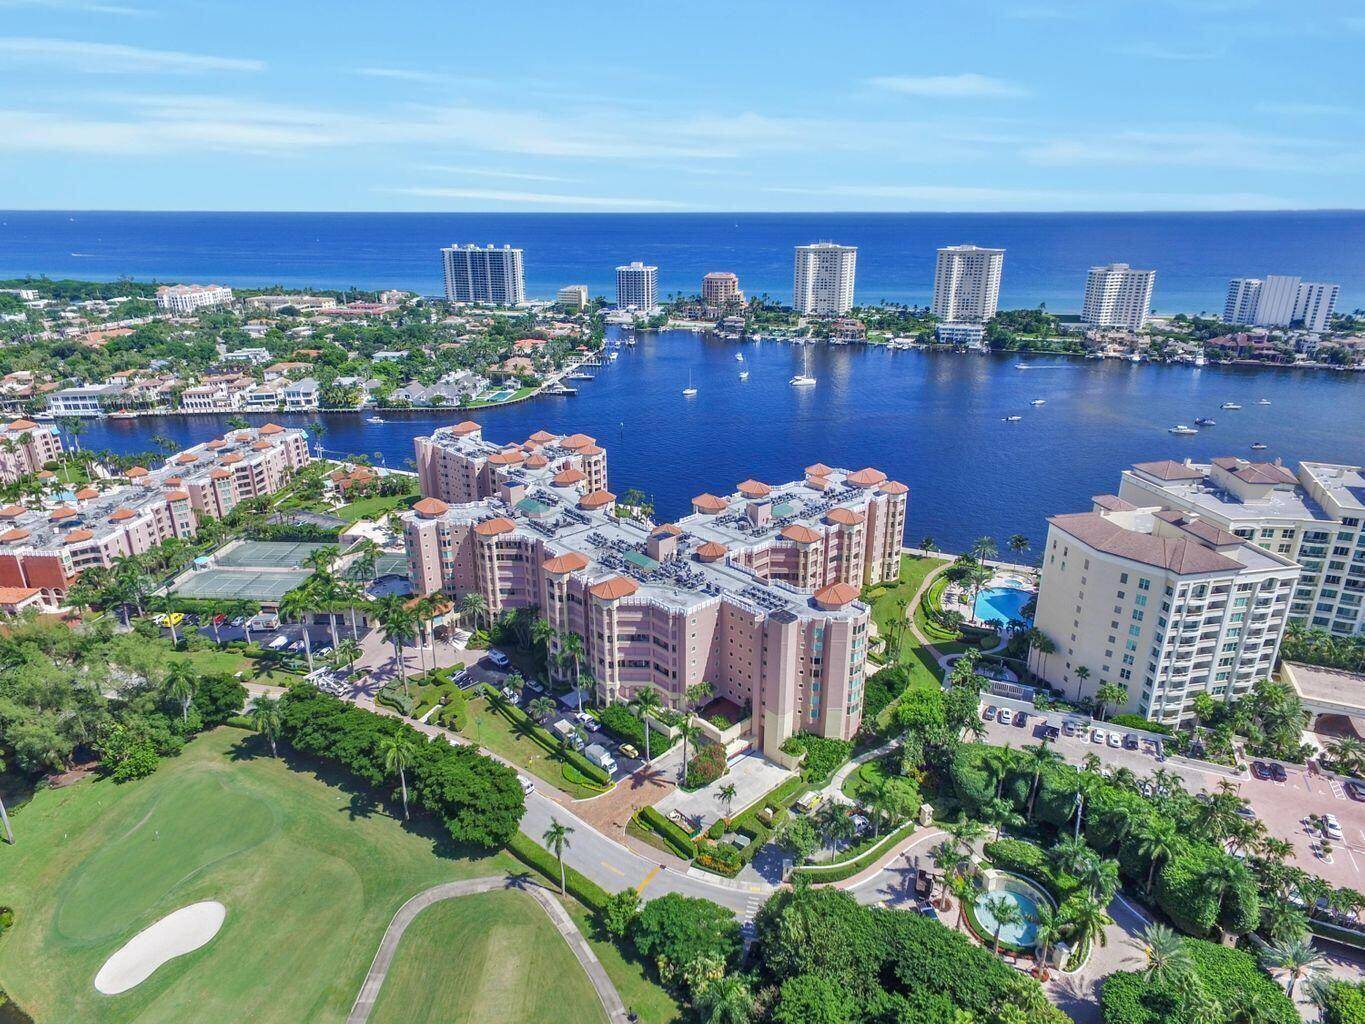 The Boca Raton Resort and Beach Club Membership is included with rental.